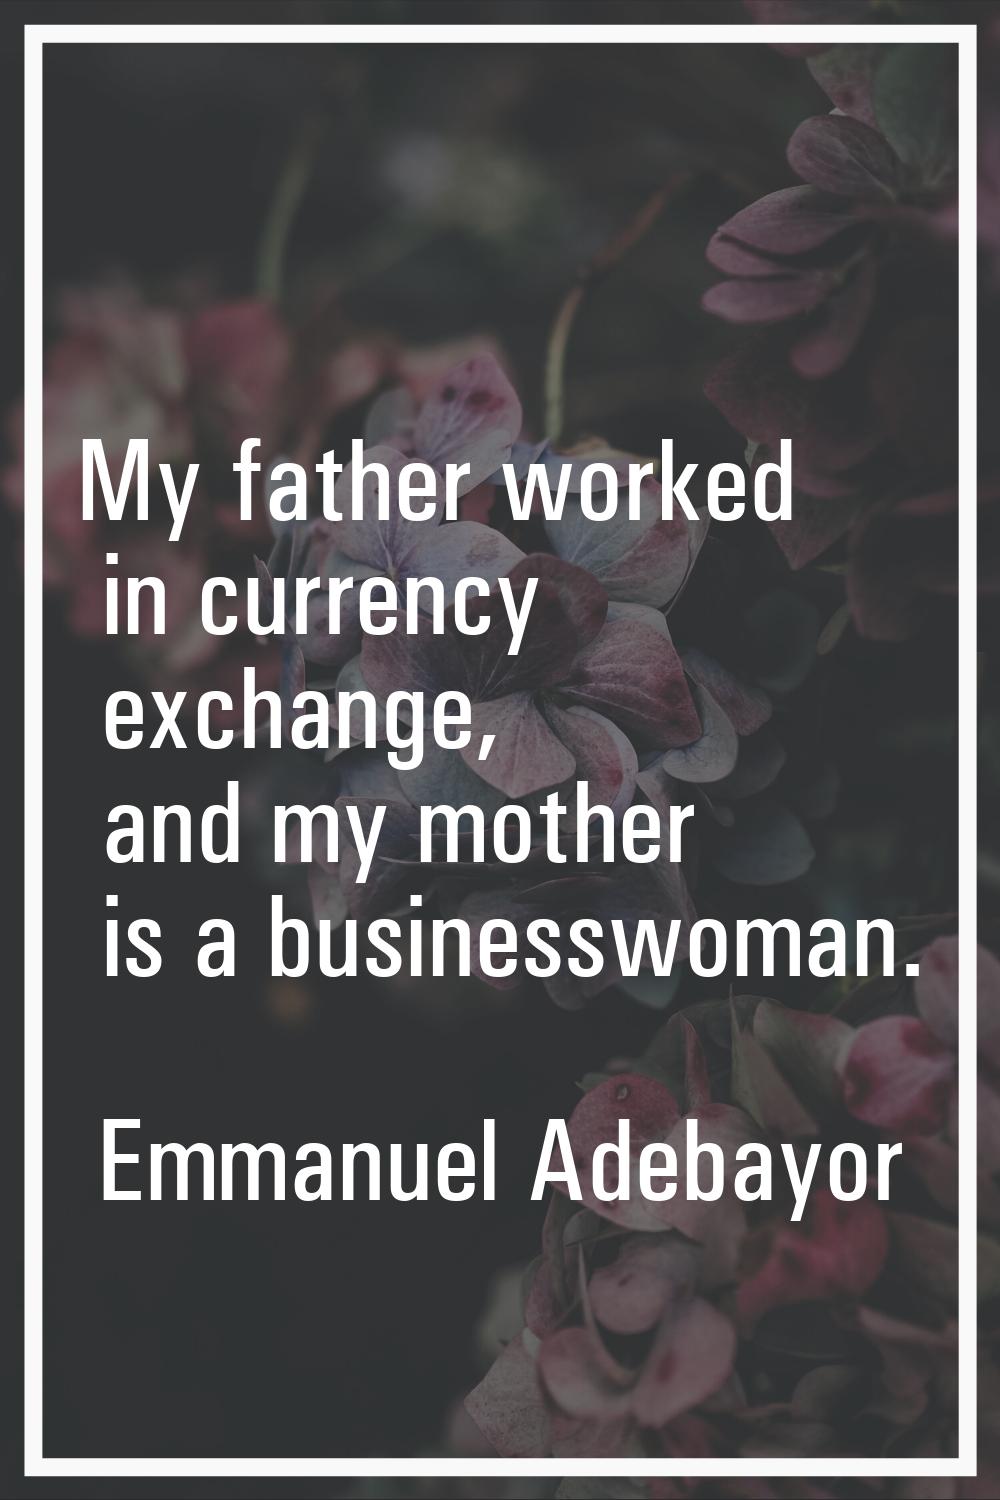 My father worked in currency exchange, and my mother is a businesswoman.